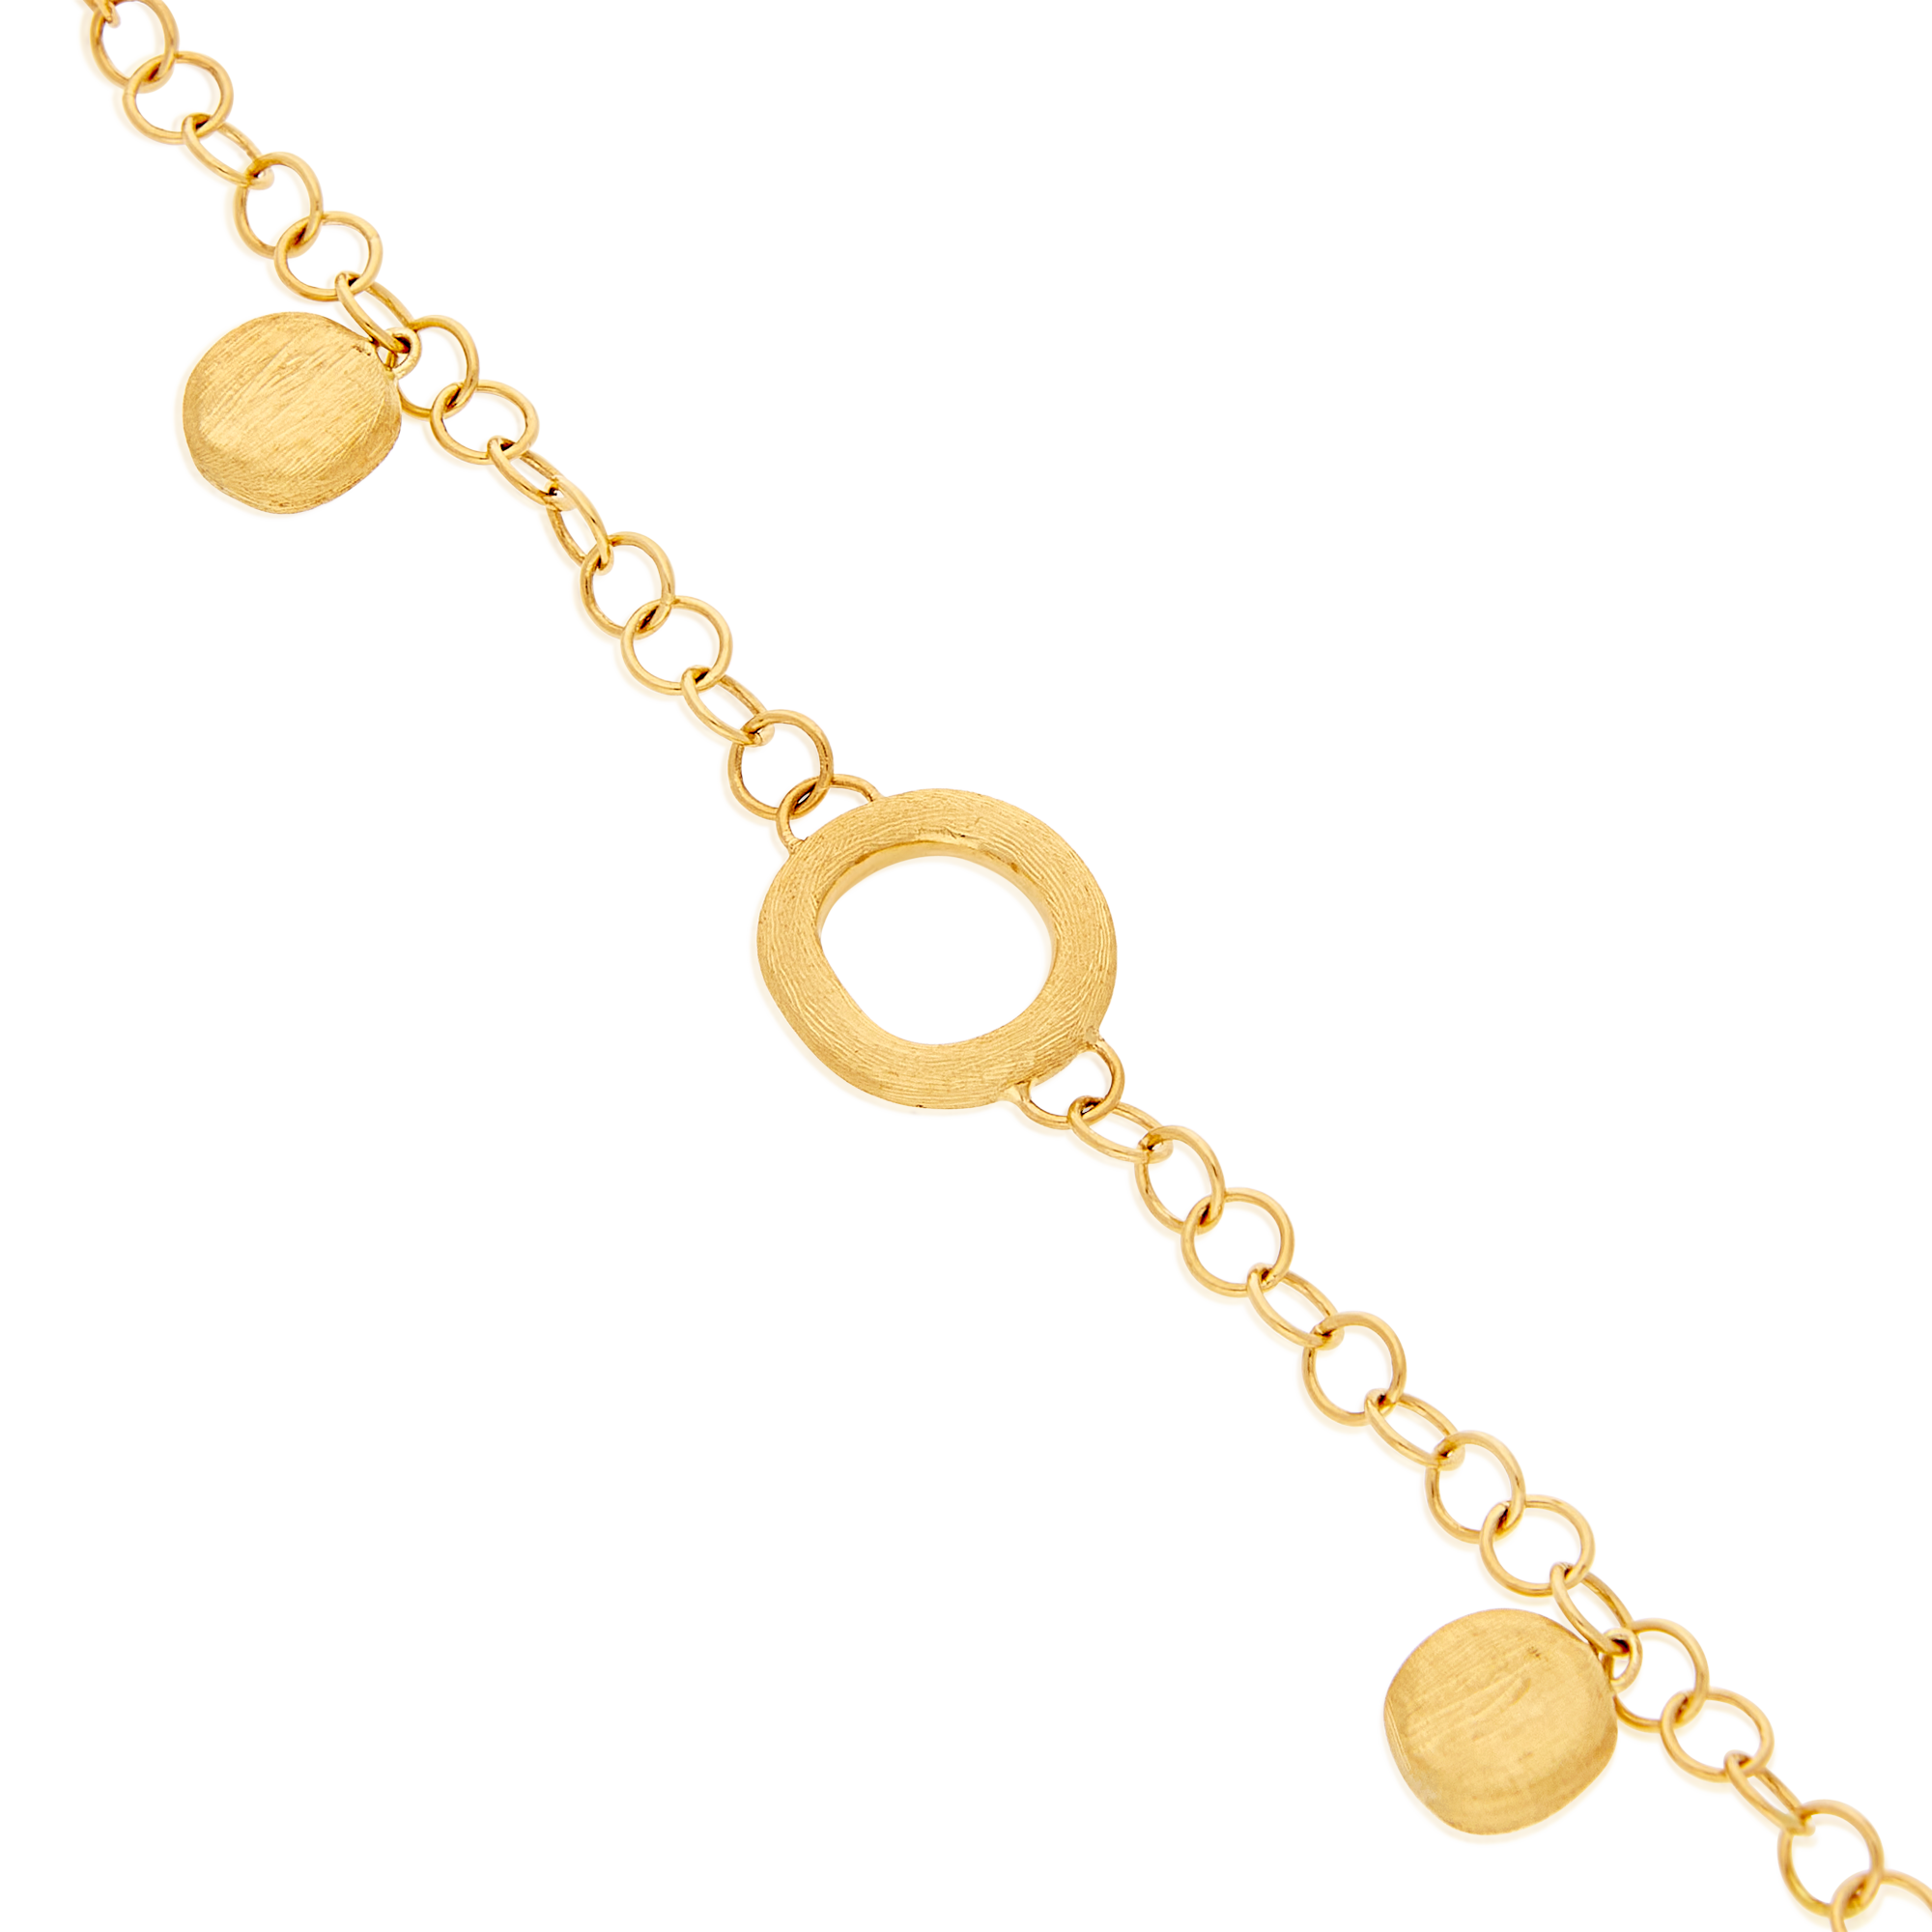 Marco Bicego Jaipur Necklace (18 inches)